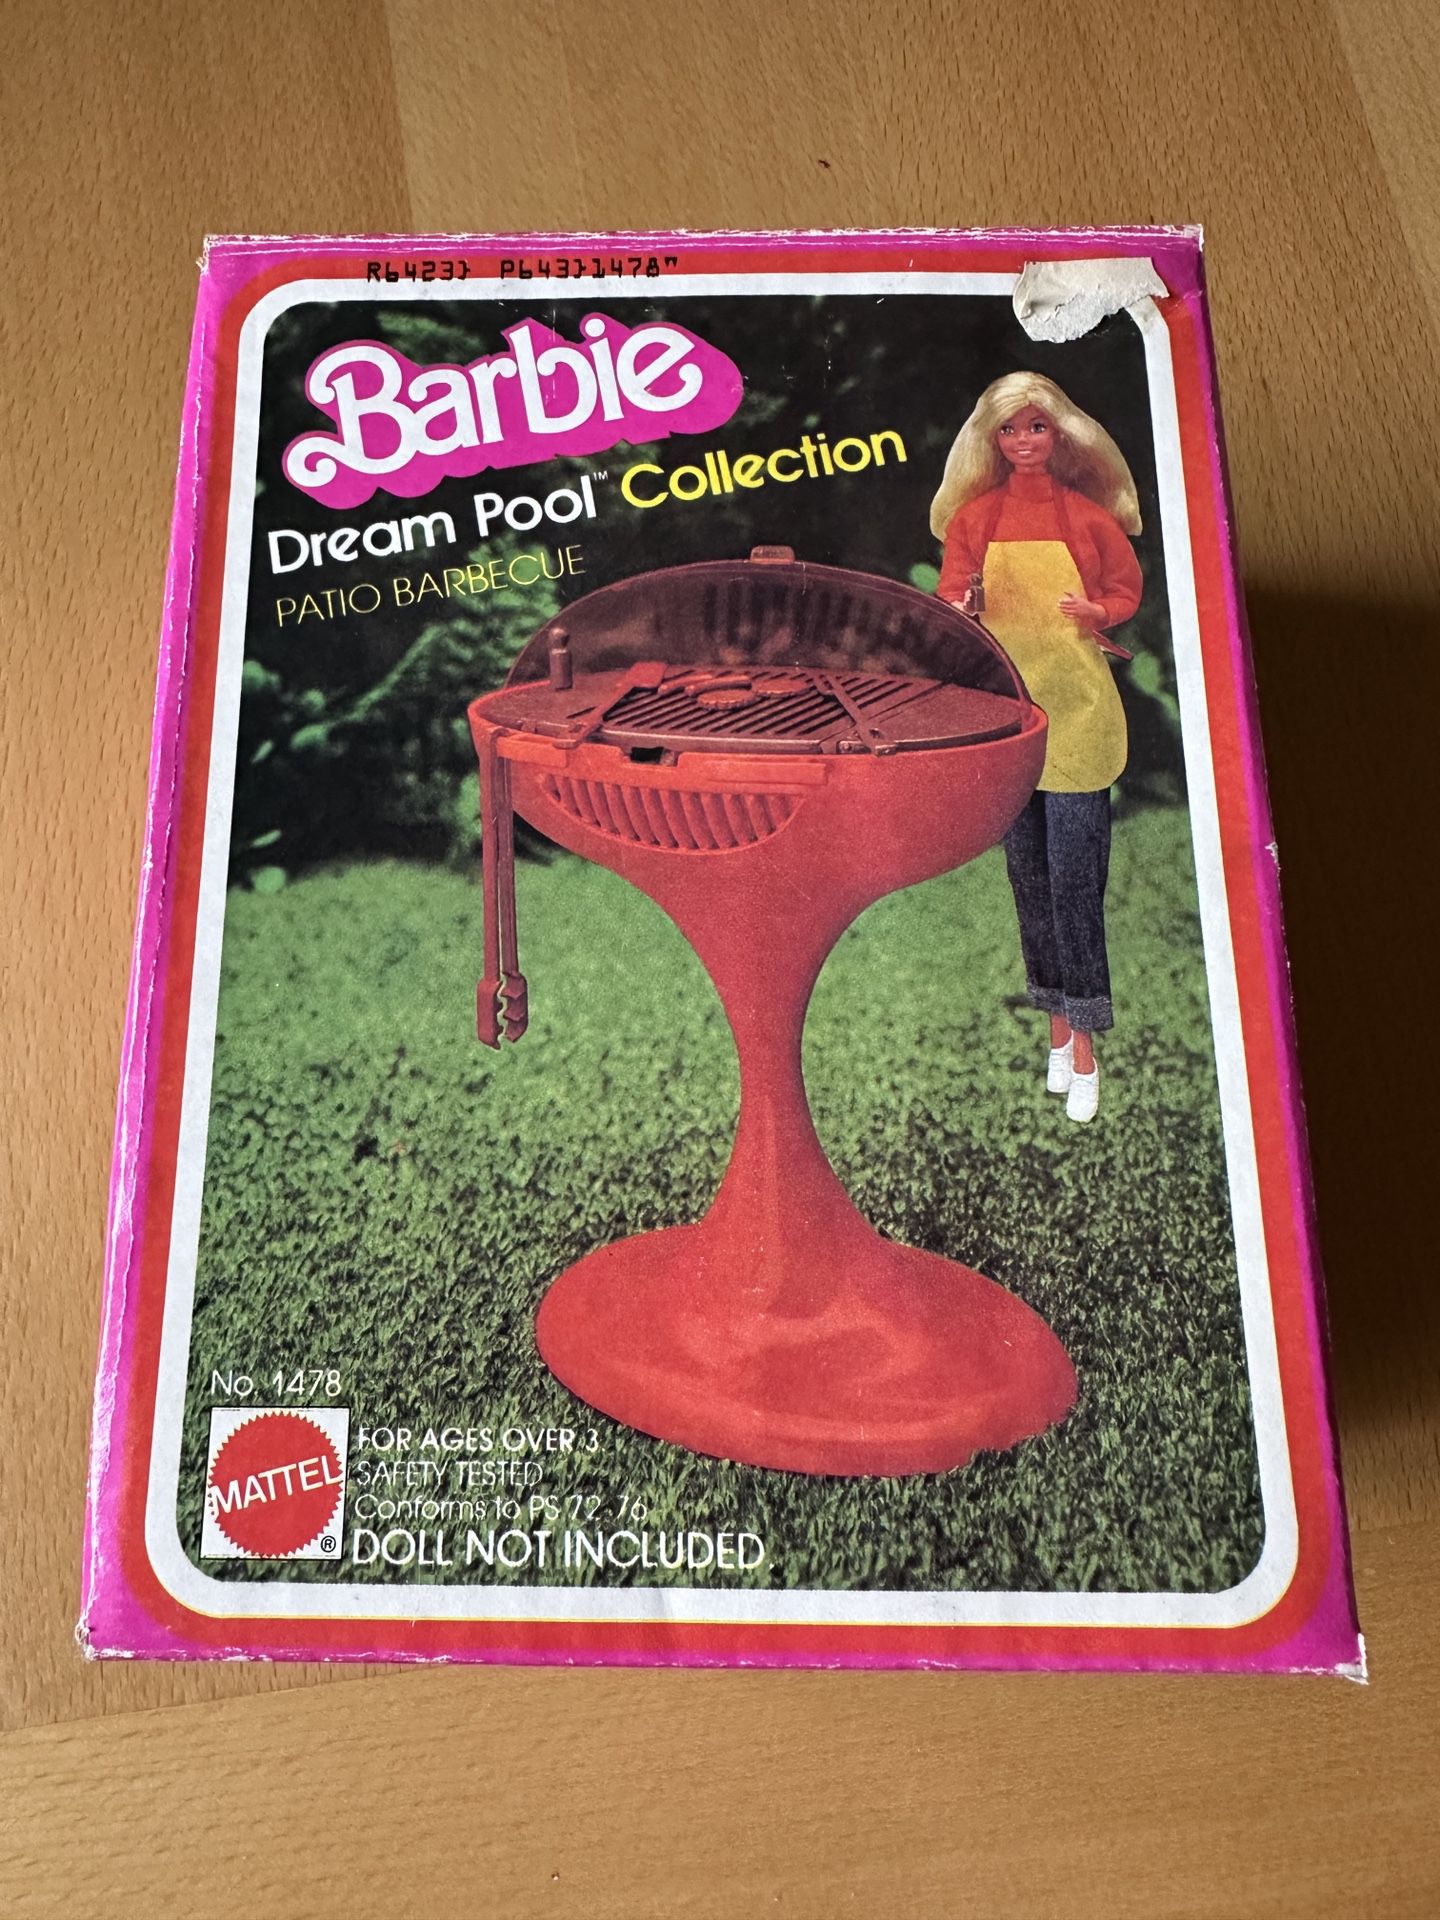 Barbie Barbecue Grill - 1980 Dream Pool Collection